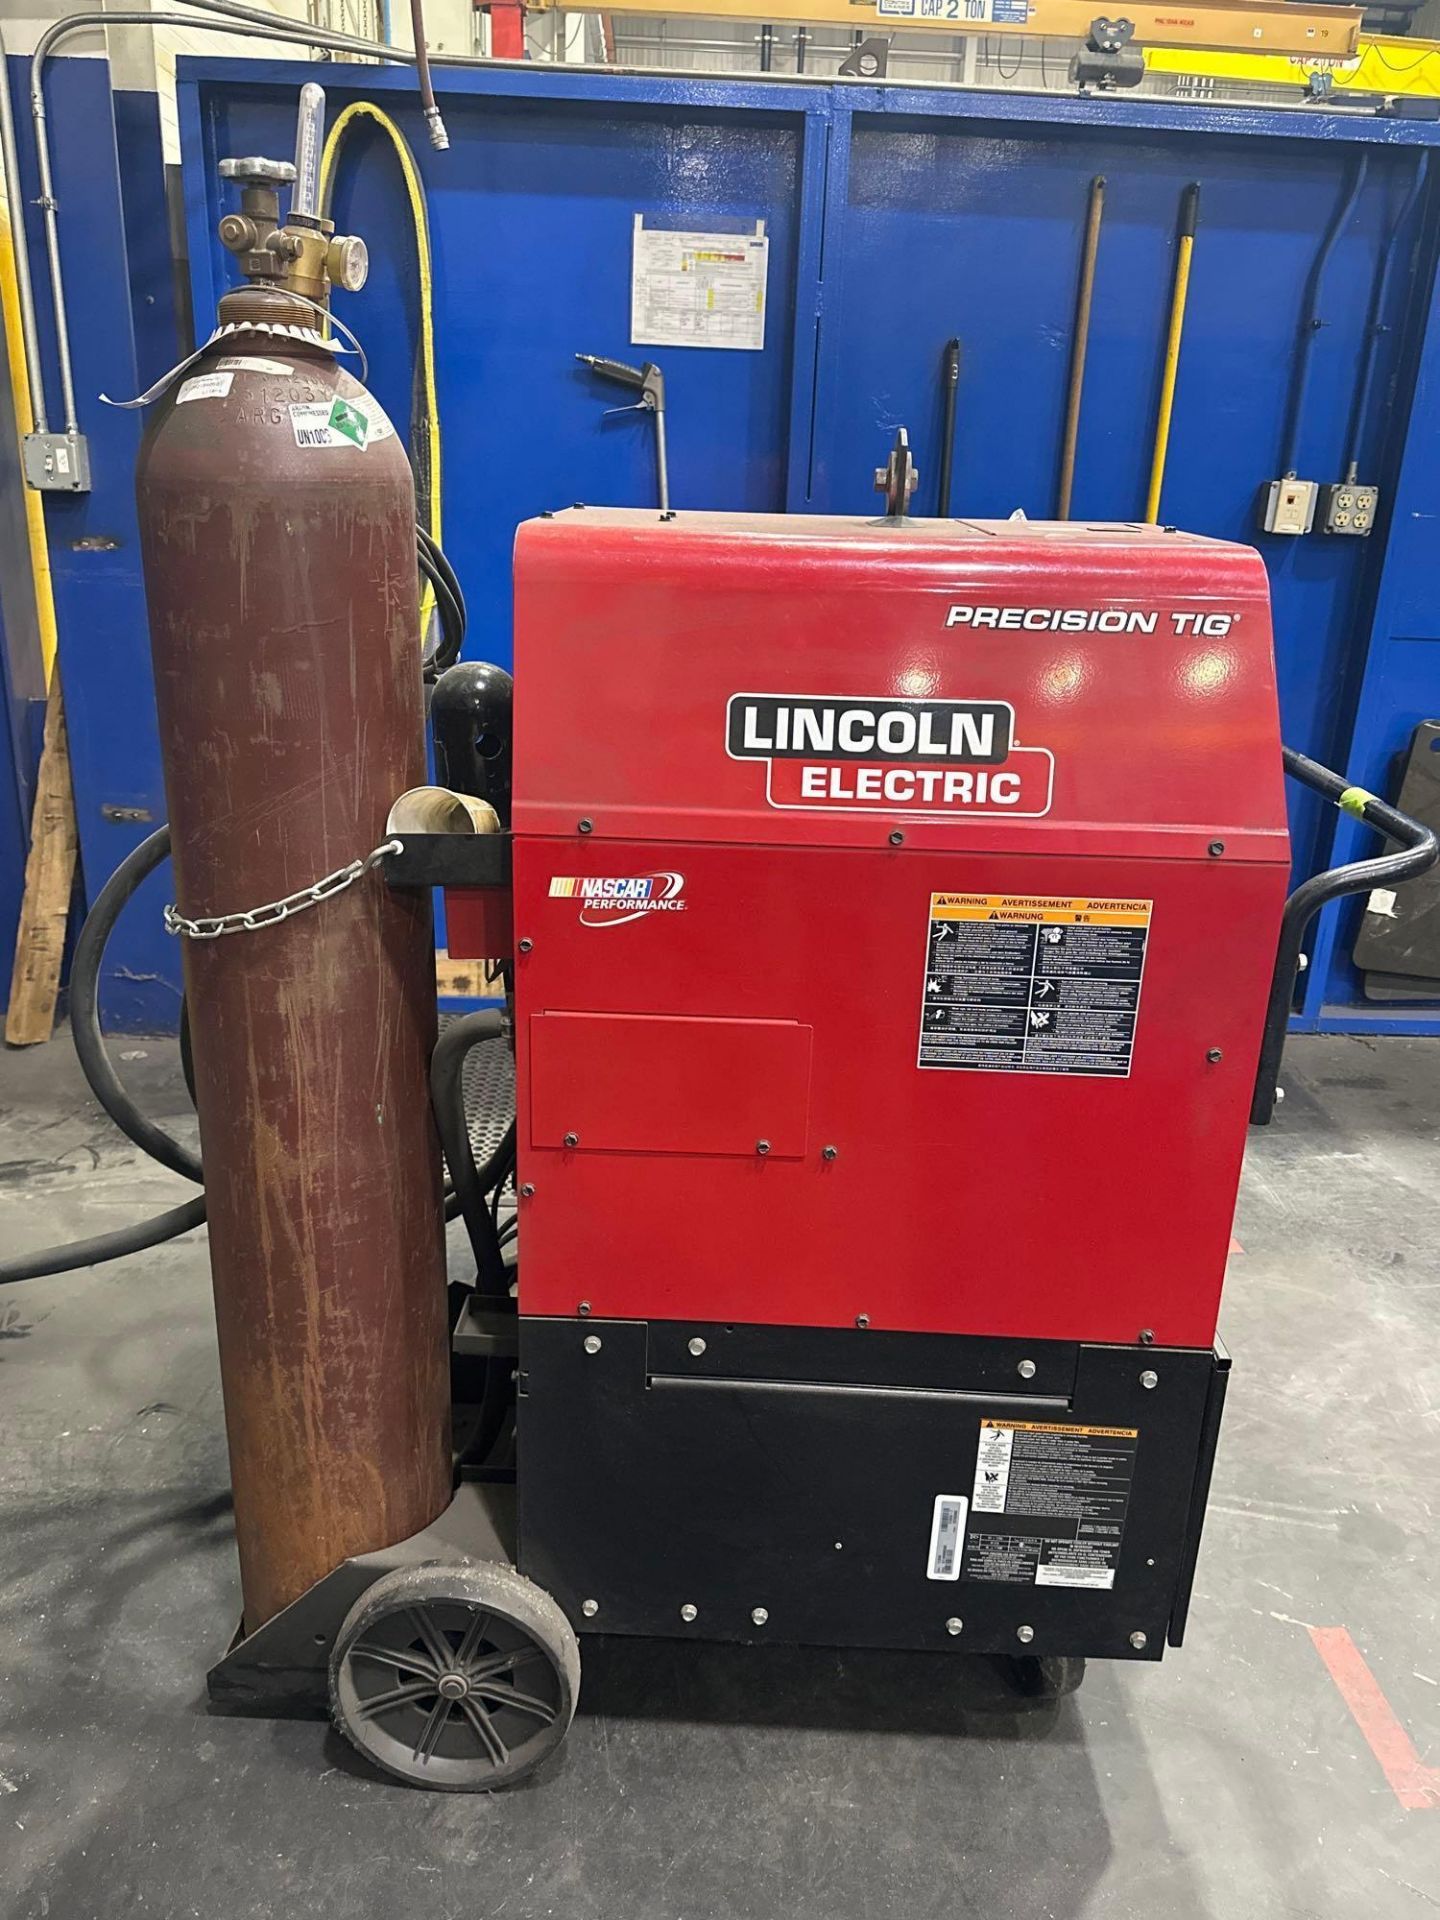 LINCOLN ELECTRIC 275 PRECISION TIG WELDER WITH ASSORTED WELDING RODS - Image 3 of 6